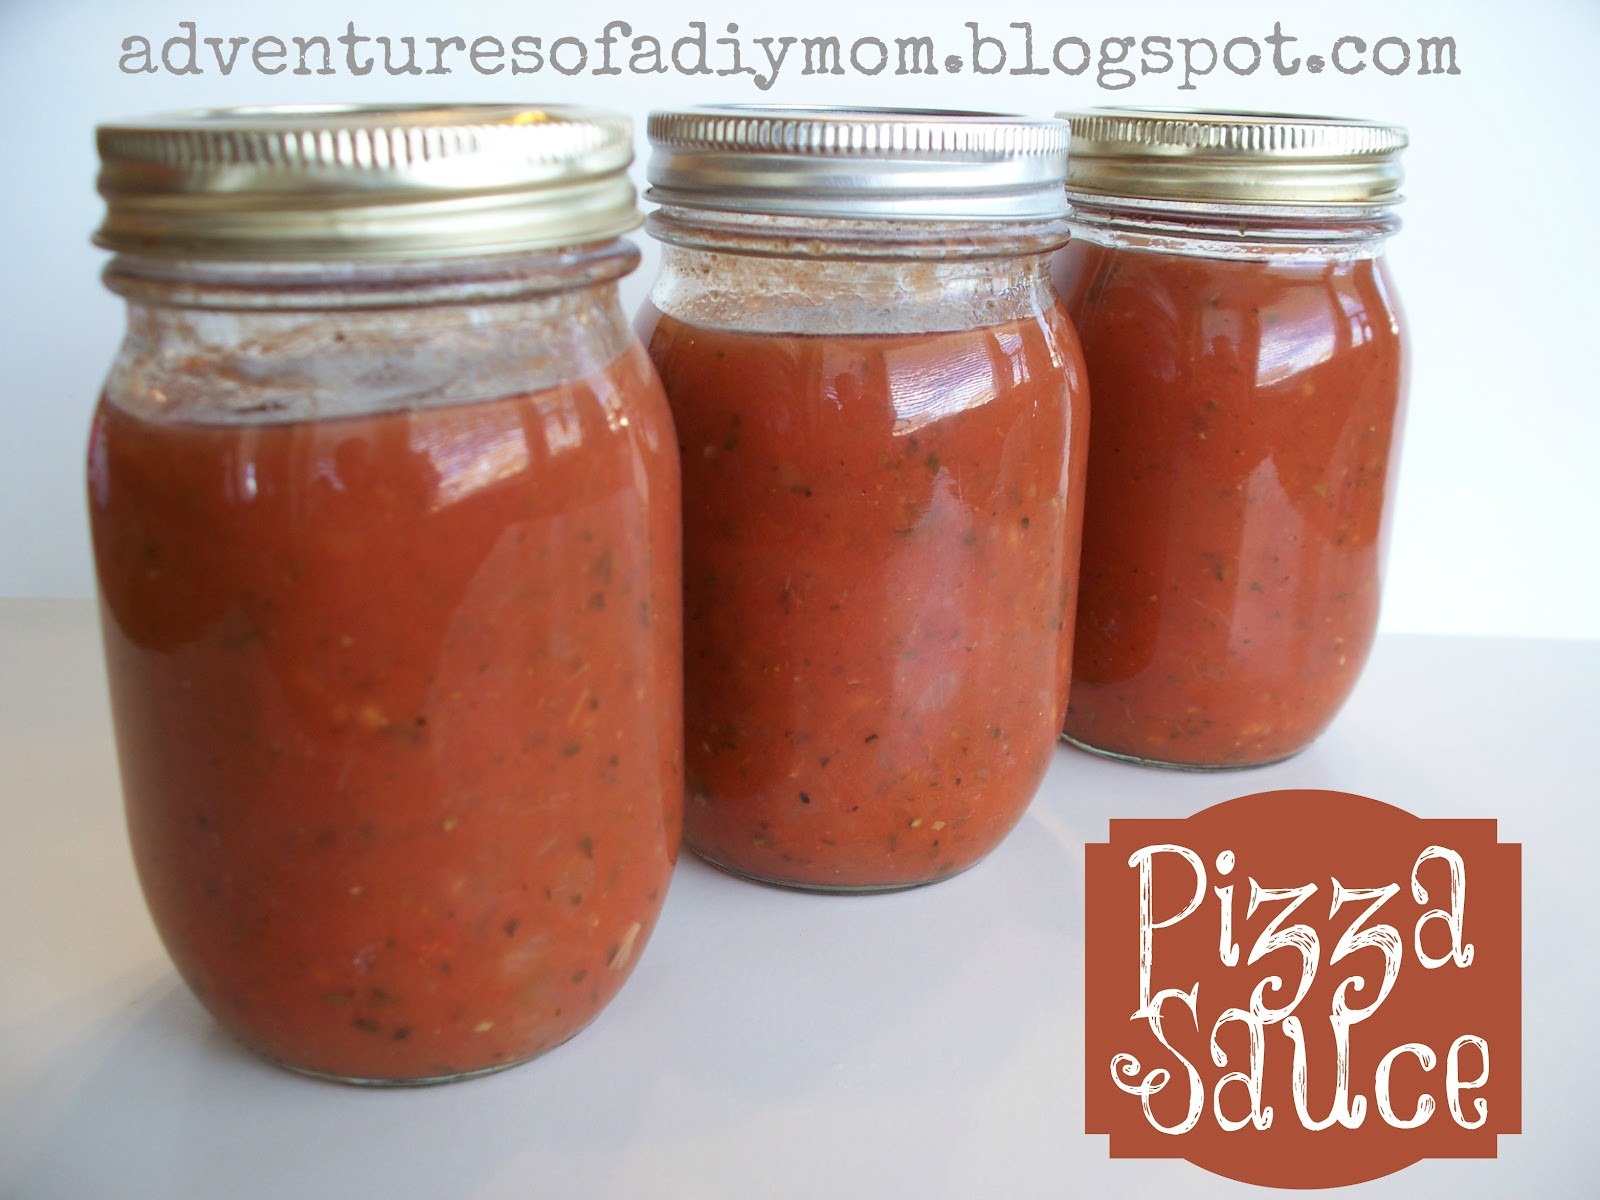 Pizza Sauce Recipe For Canning
 Home Canned Pizza Sauce Adventures of a DIY Mom